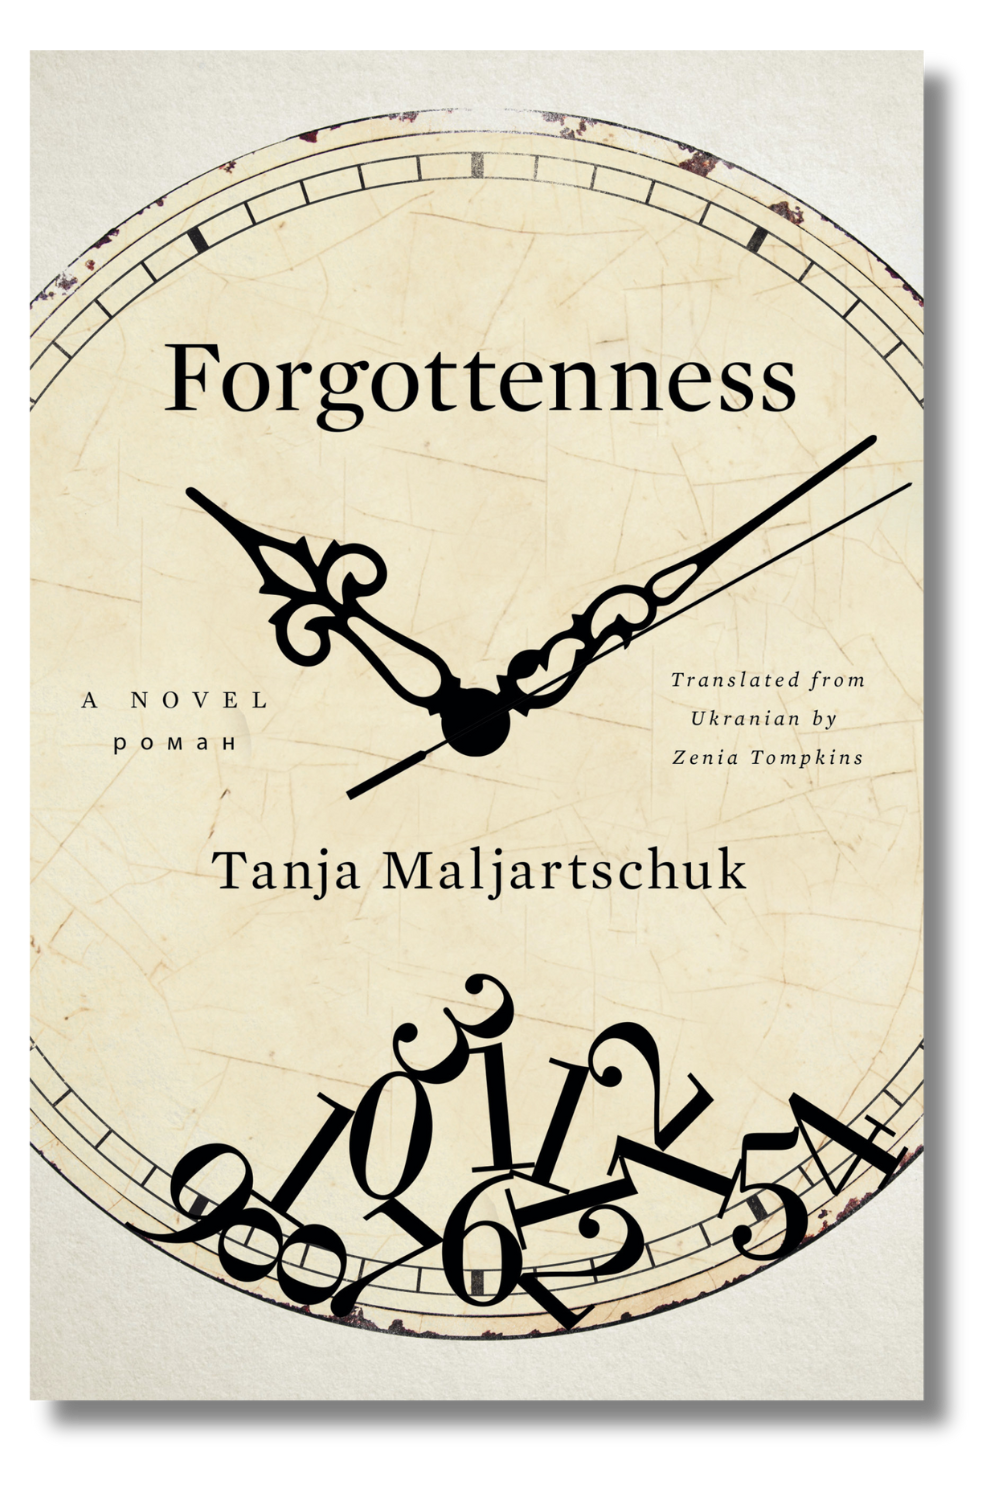 The cover of "Forgottenness" by Tanja Maljartschuk, tr. by Zenia Tompkins